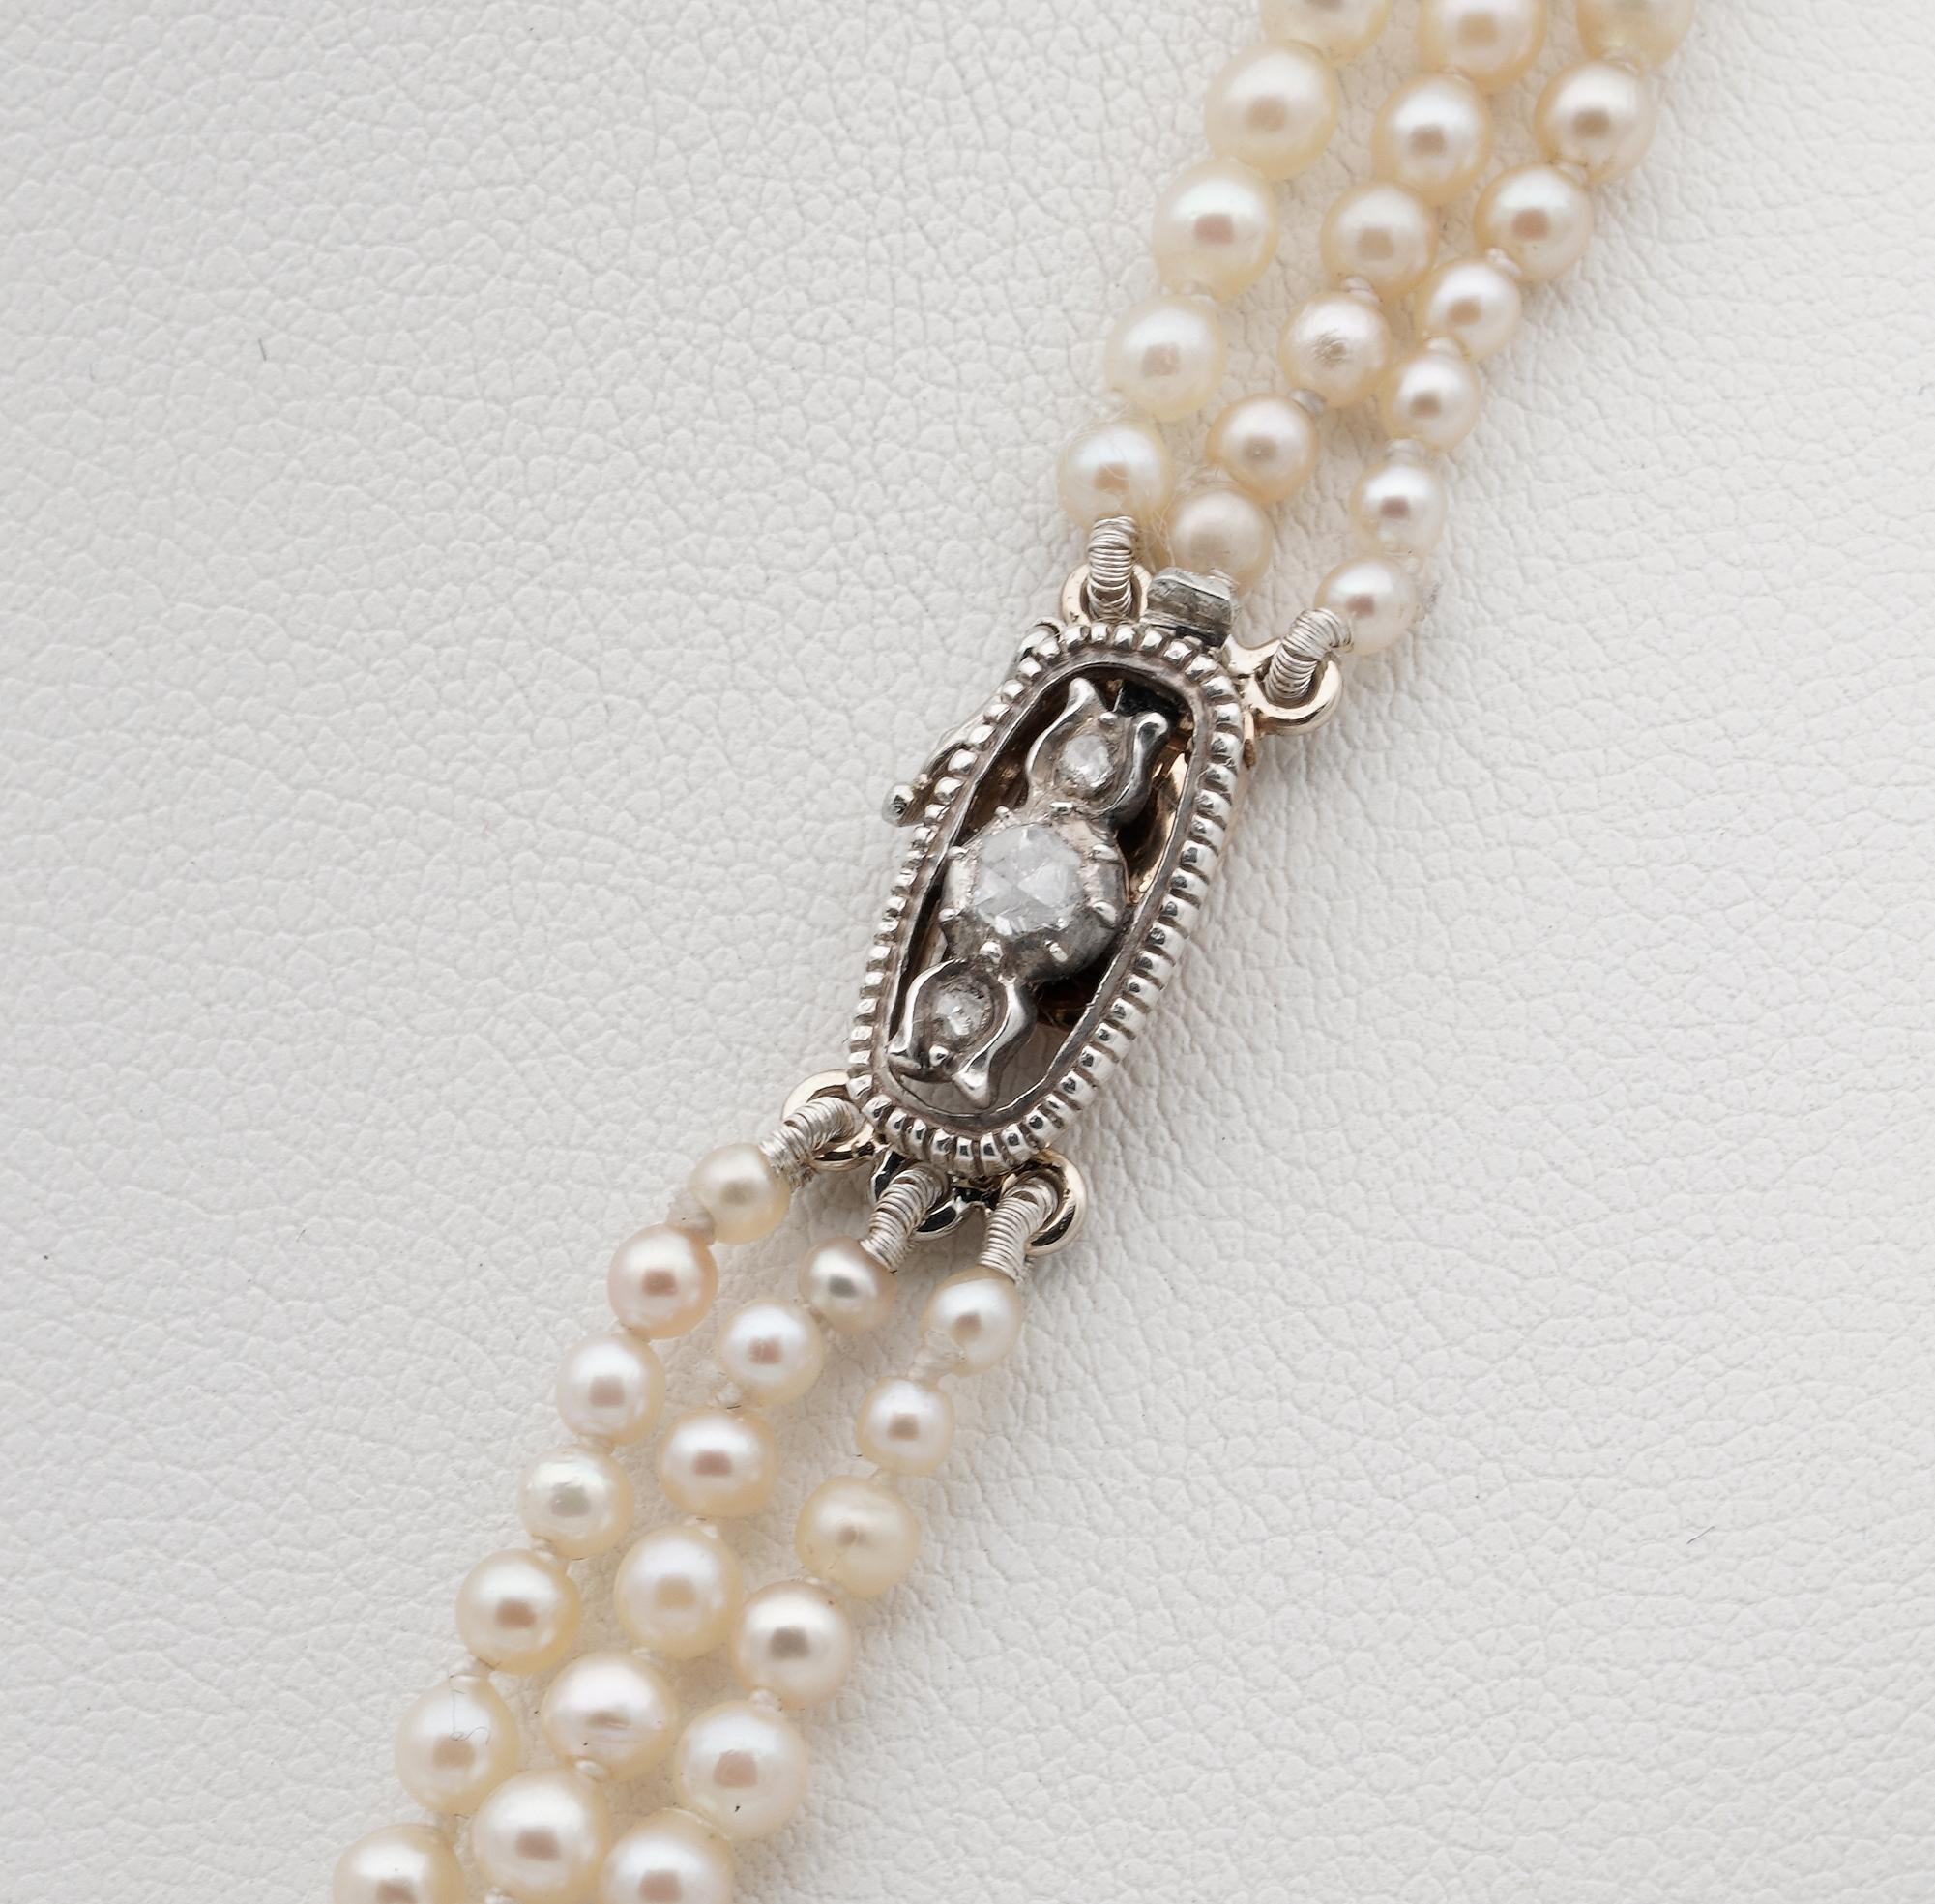 Antique Triple Strand Cultured Pearls Rose Cut Diamond Clasp For Sale 1